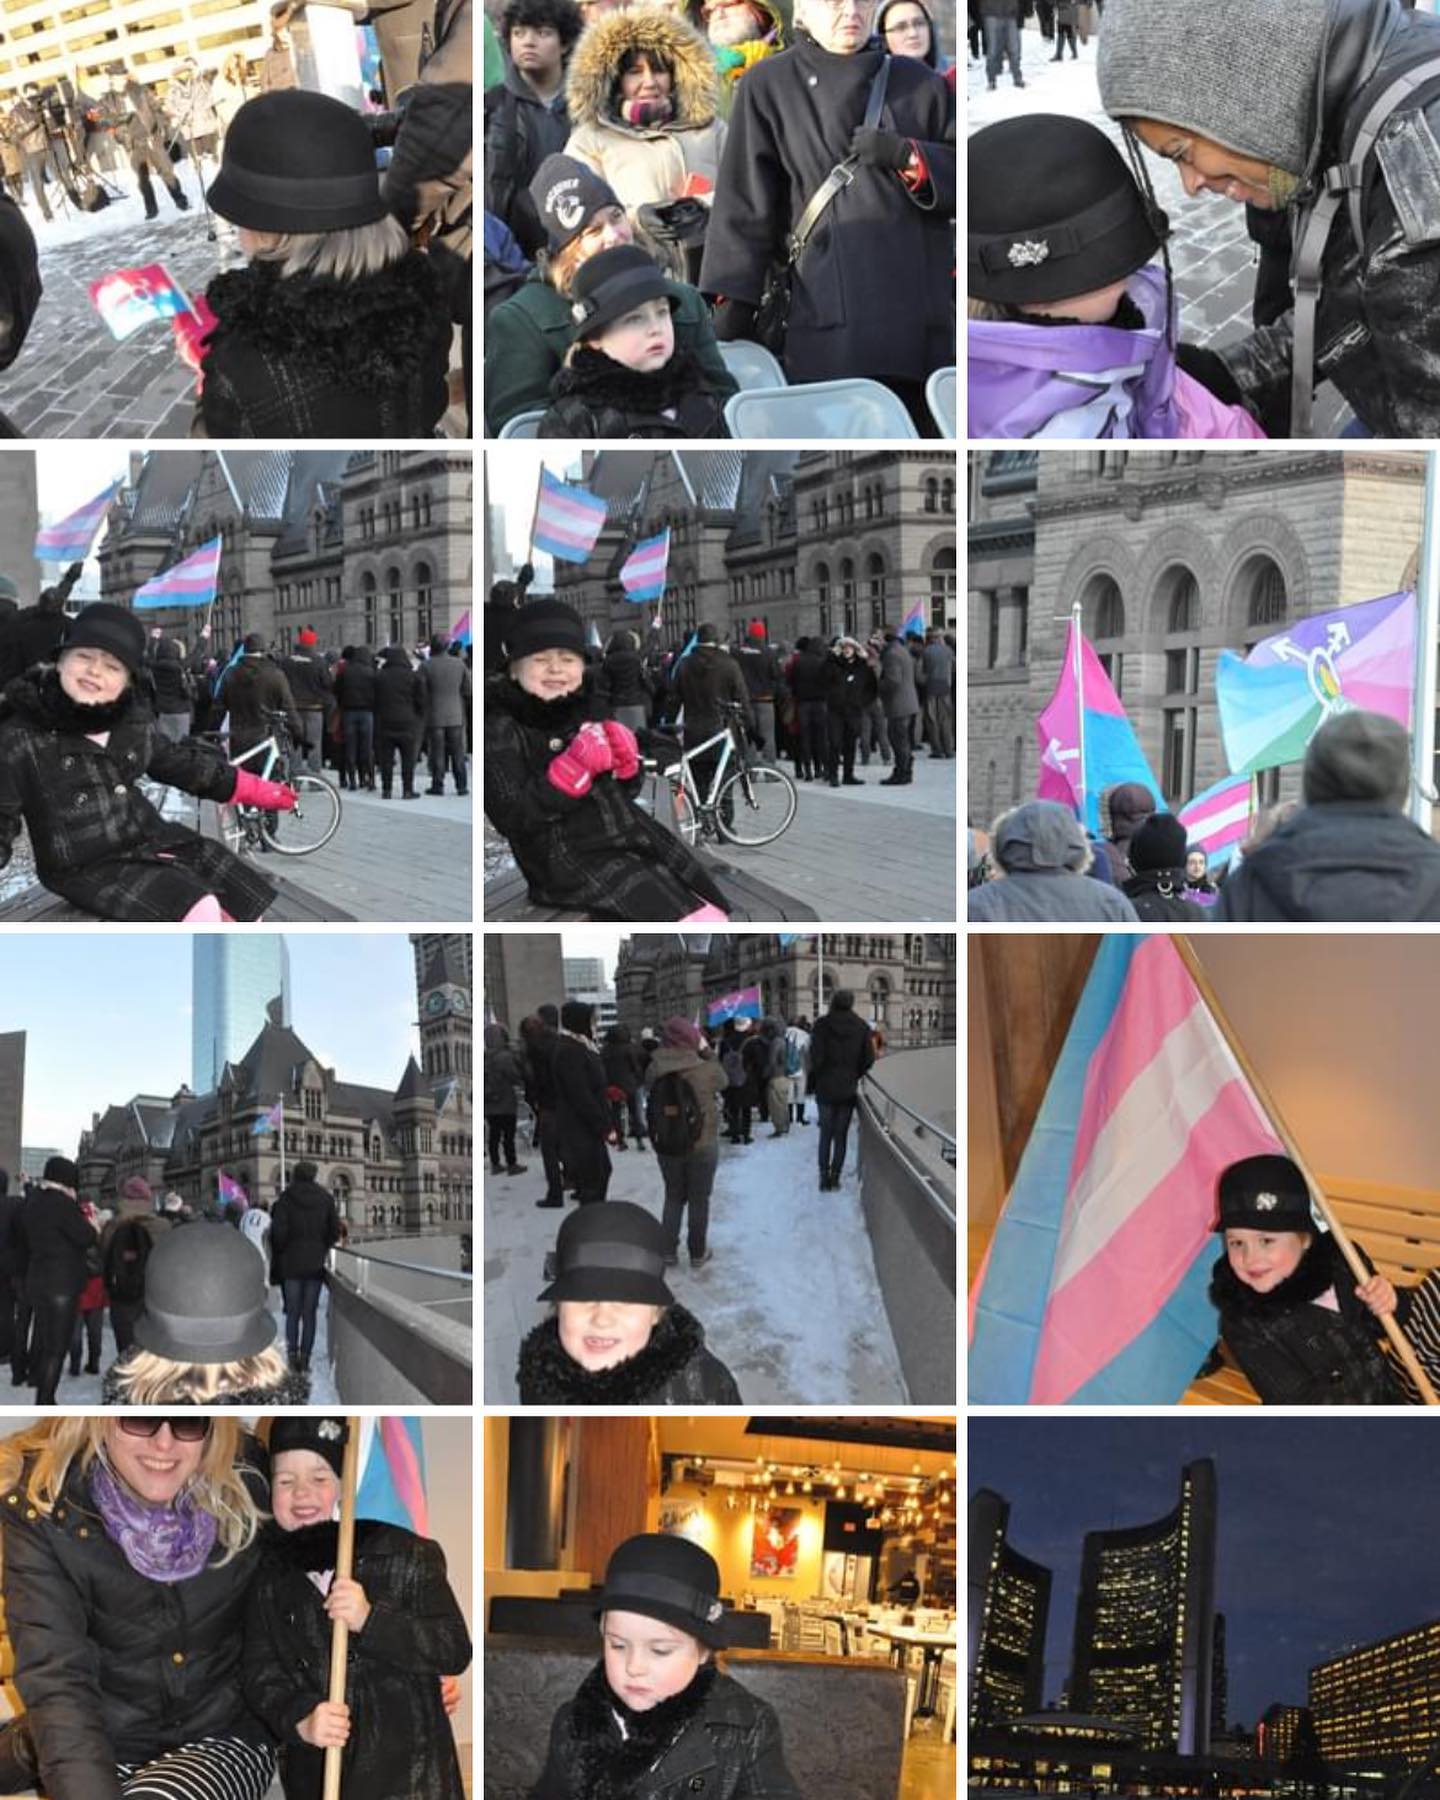 Working on Trans Day of Remembrance logistics for this year and crying like a baby over the last 7 years of TDOR Toronto City Hall pictures.